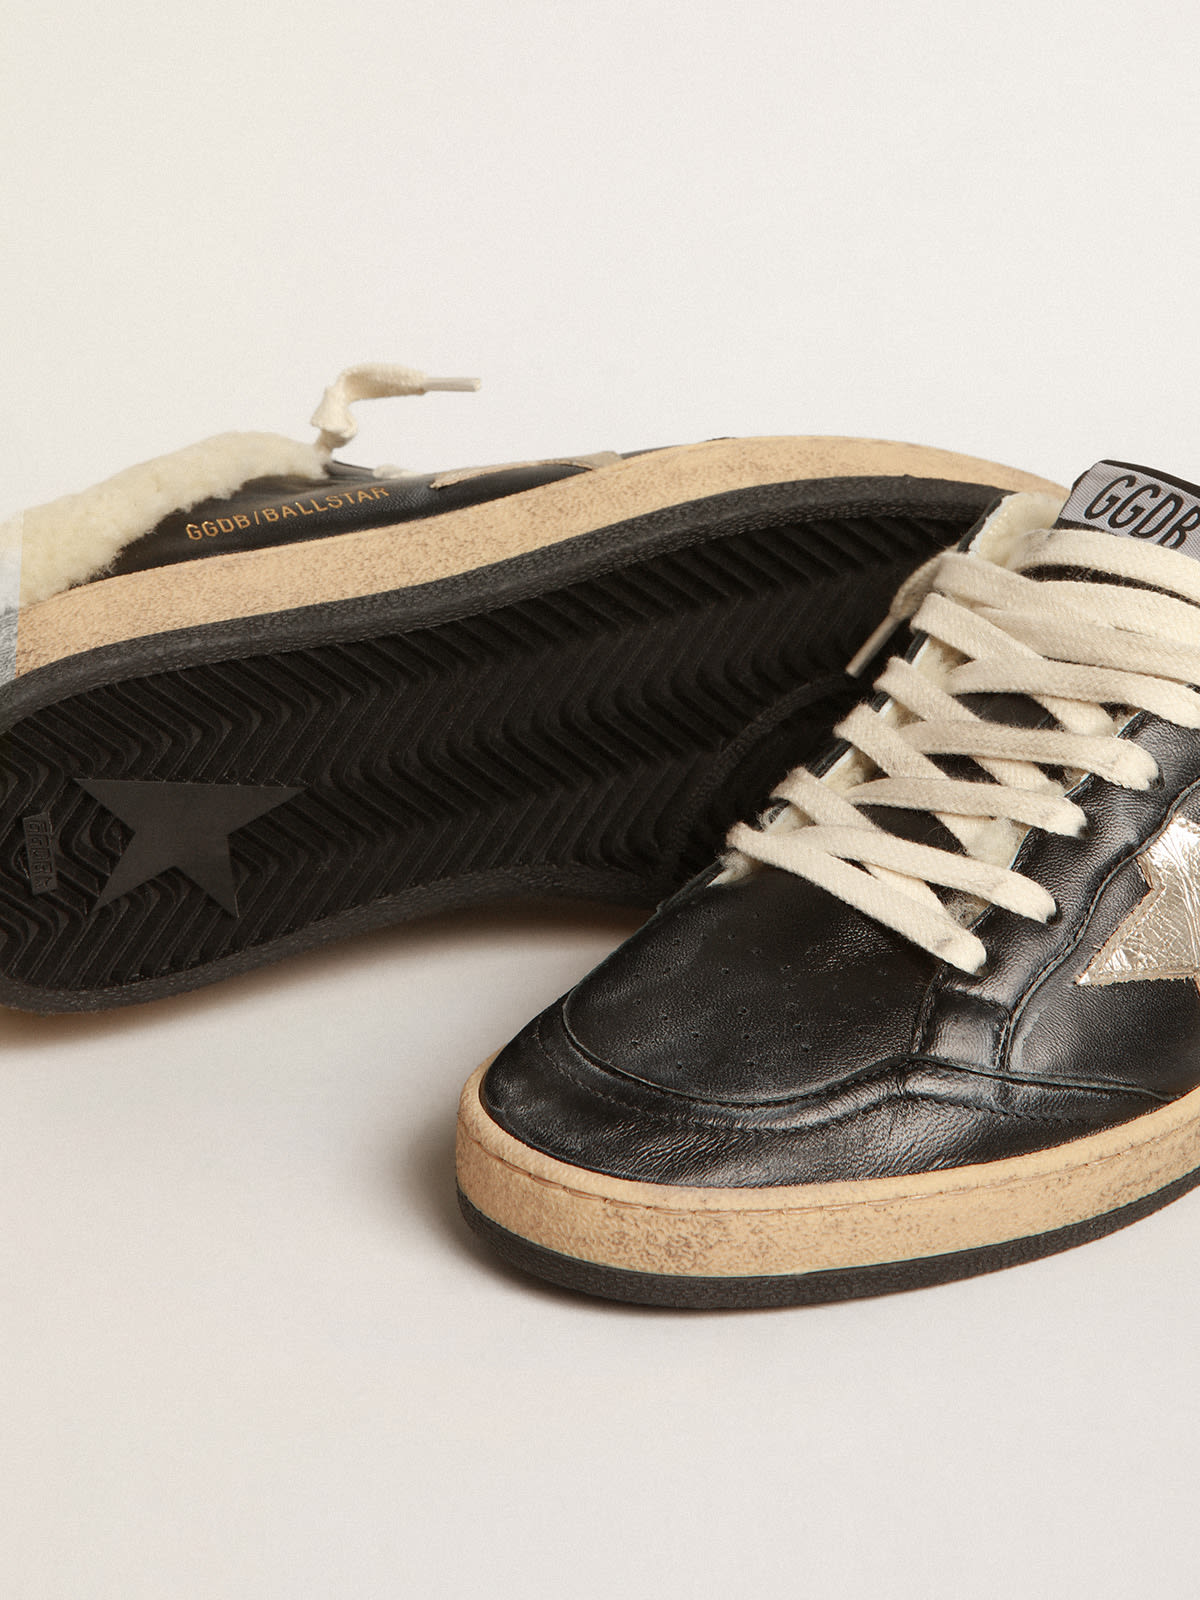 Golden Goose - Ball Star Sabots in nappa with platinum star and shearling lining in 